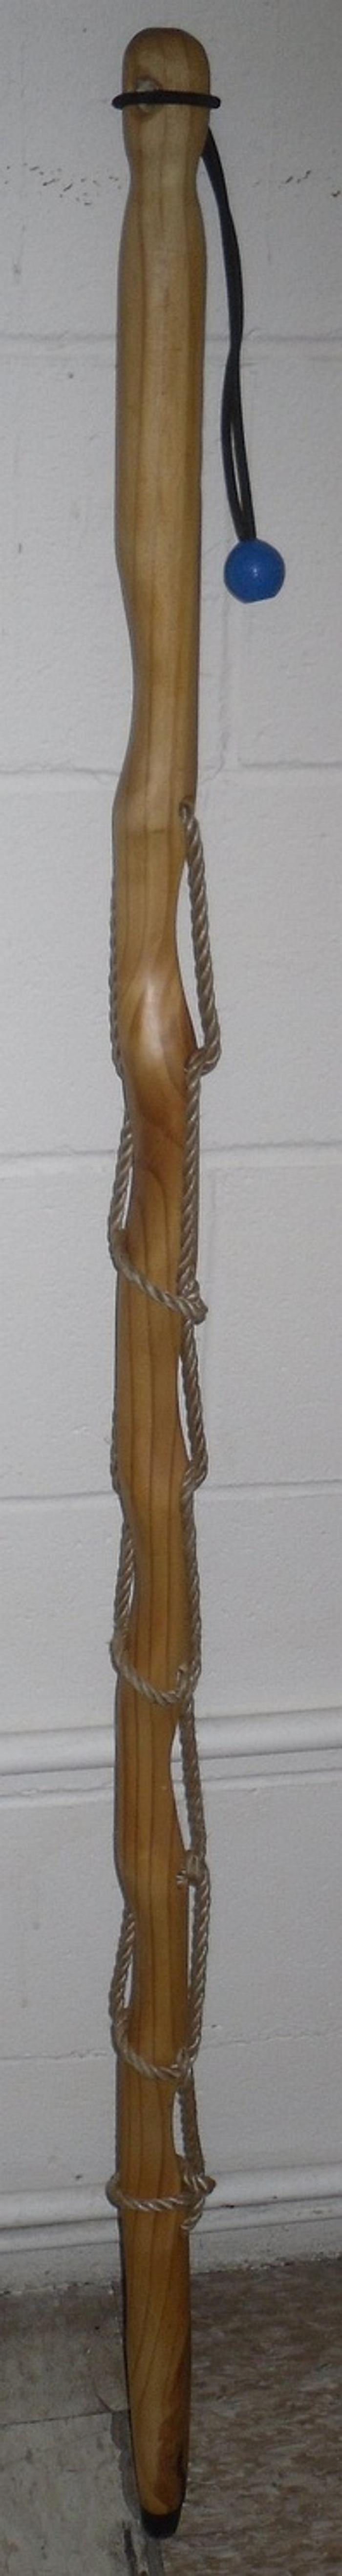 Scooped Walking Stick With Rope Detail